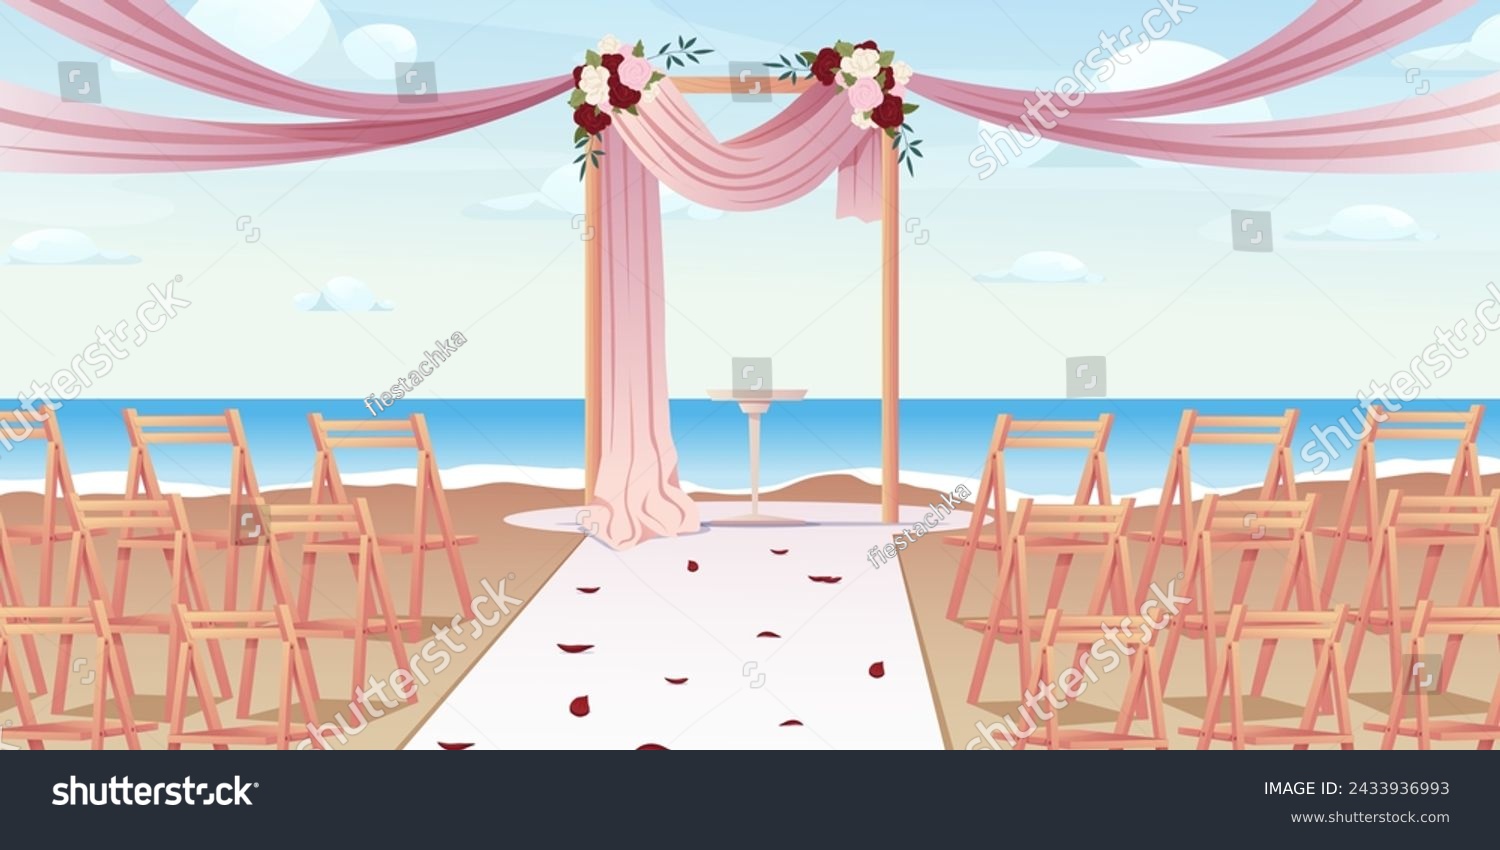 SVG of Wedding ceremony outdoor setup. Wedding ceremony setup with arch draped with ribbons and decorations. Vector illustration svg